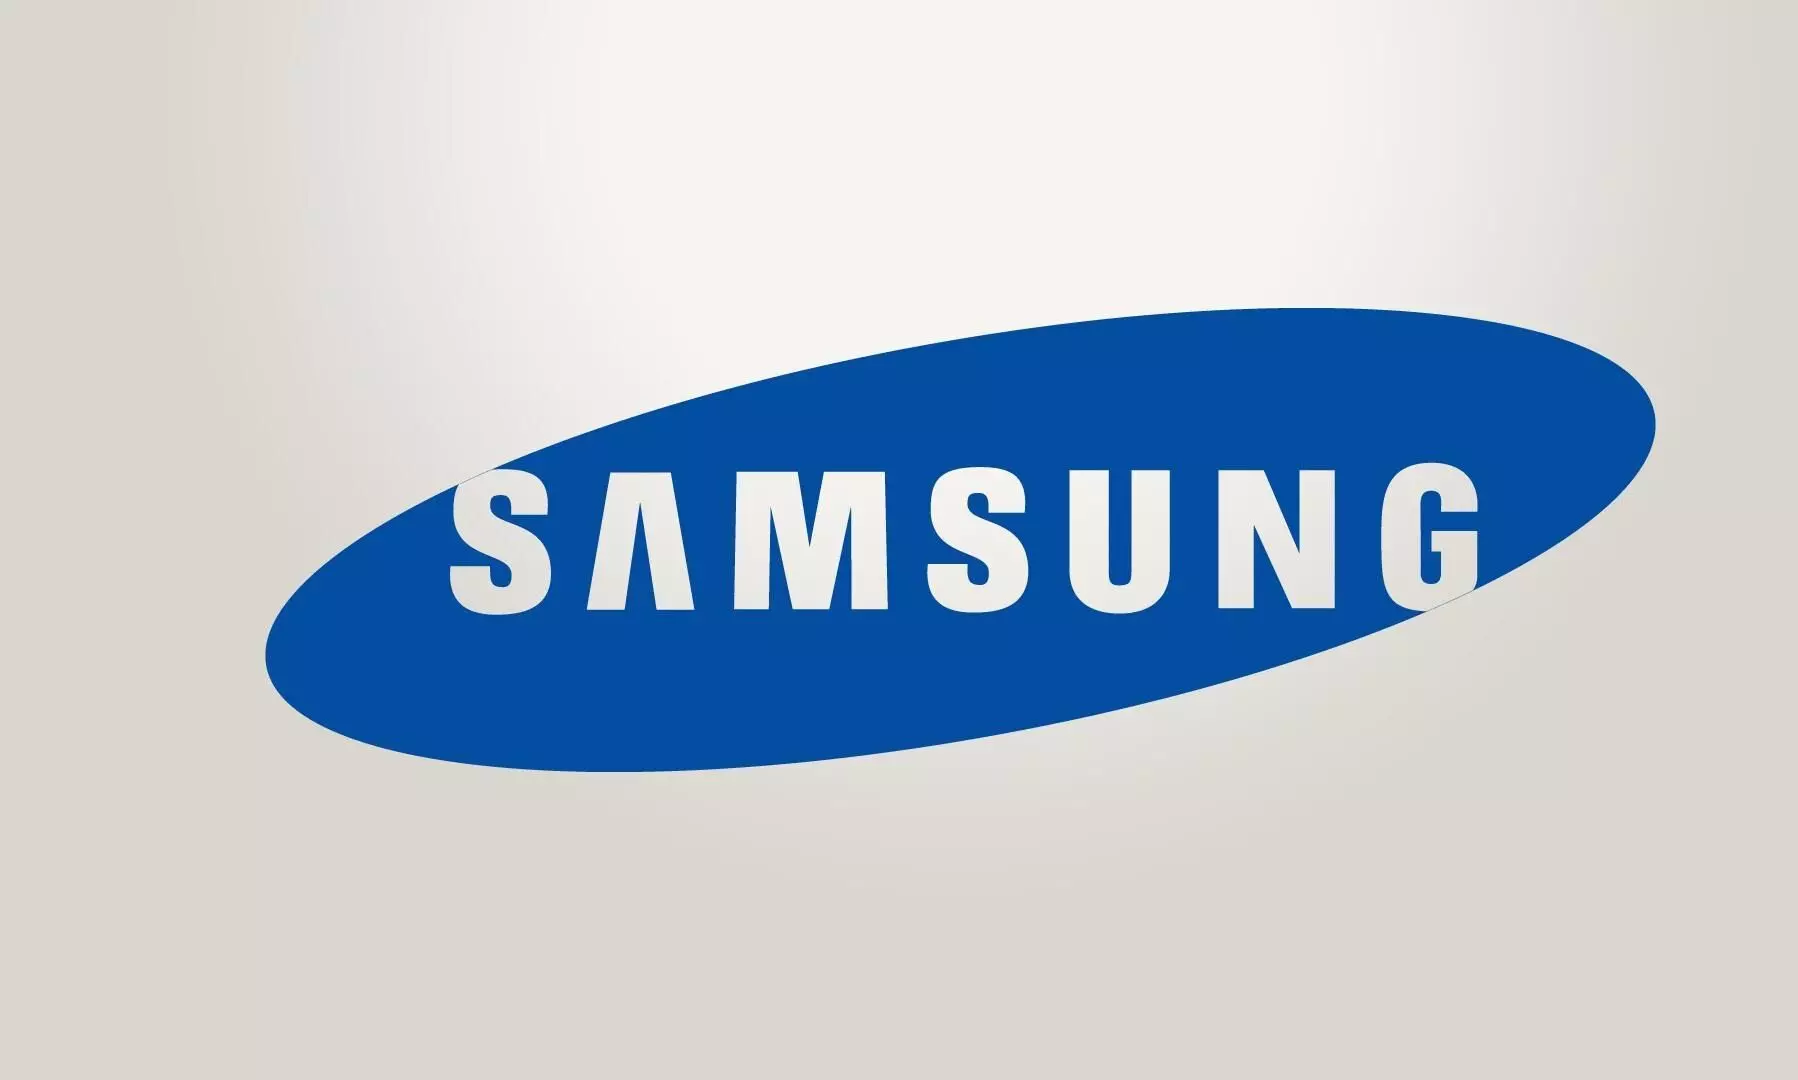 Samsung plans to hire 1,000 engineering graduates in India next year